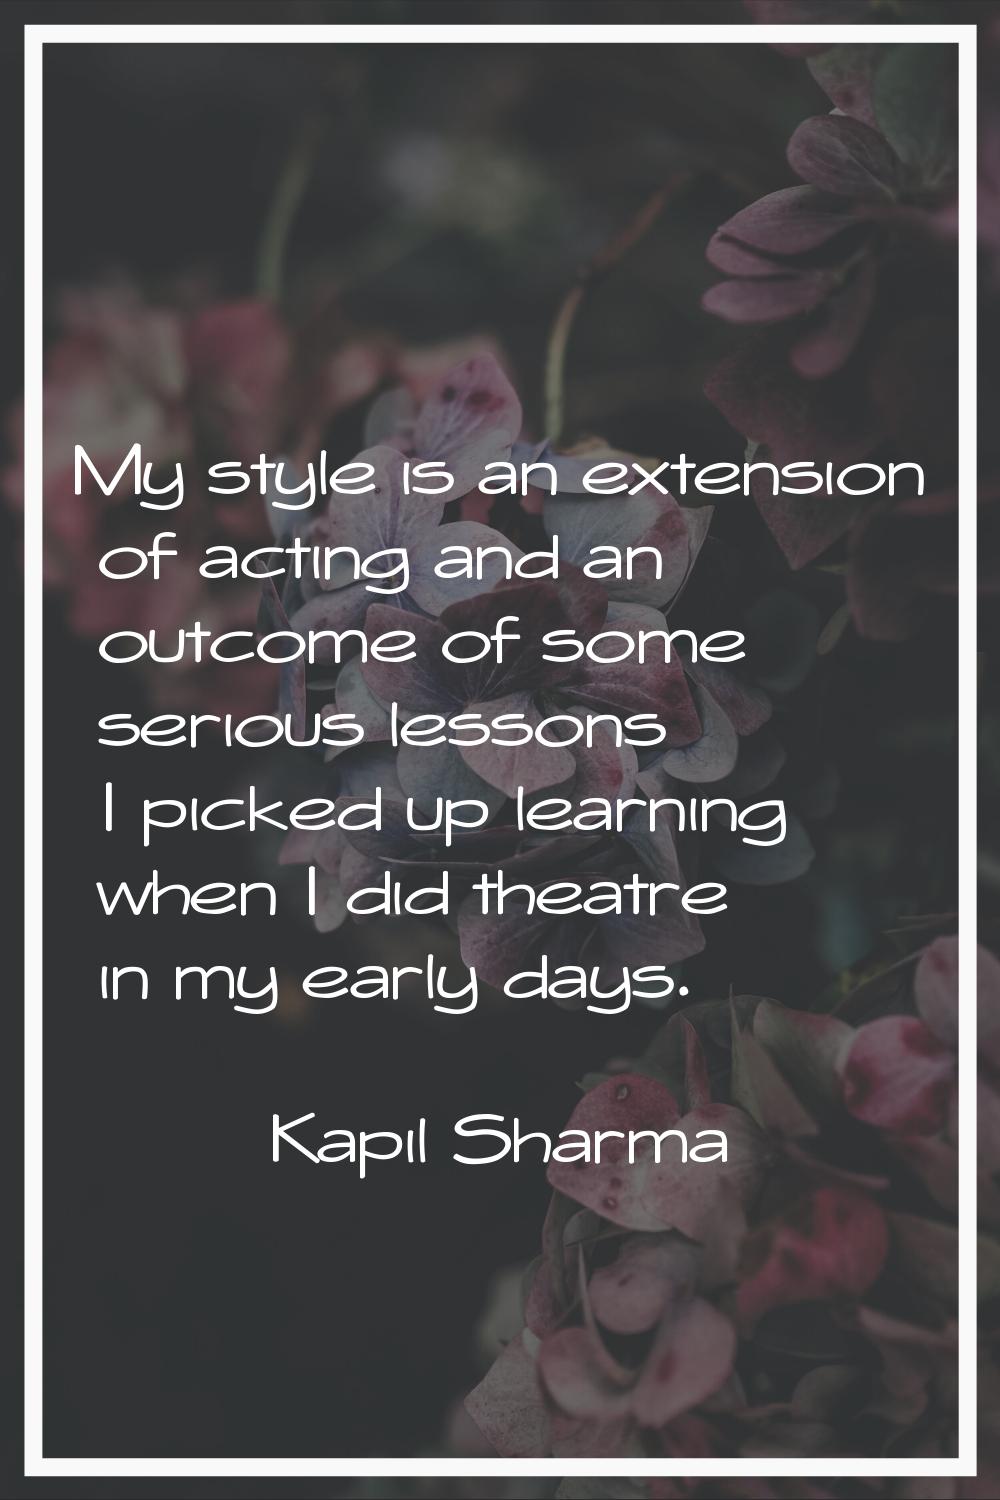 My style is an extension of acting and an outcome of some serious lessons I picked up learning when